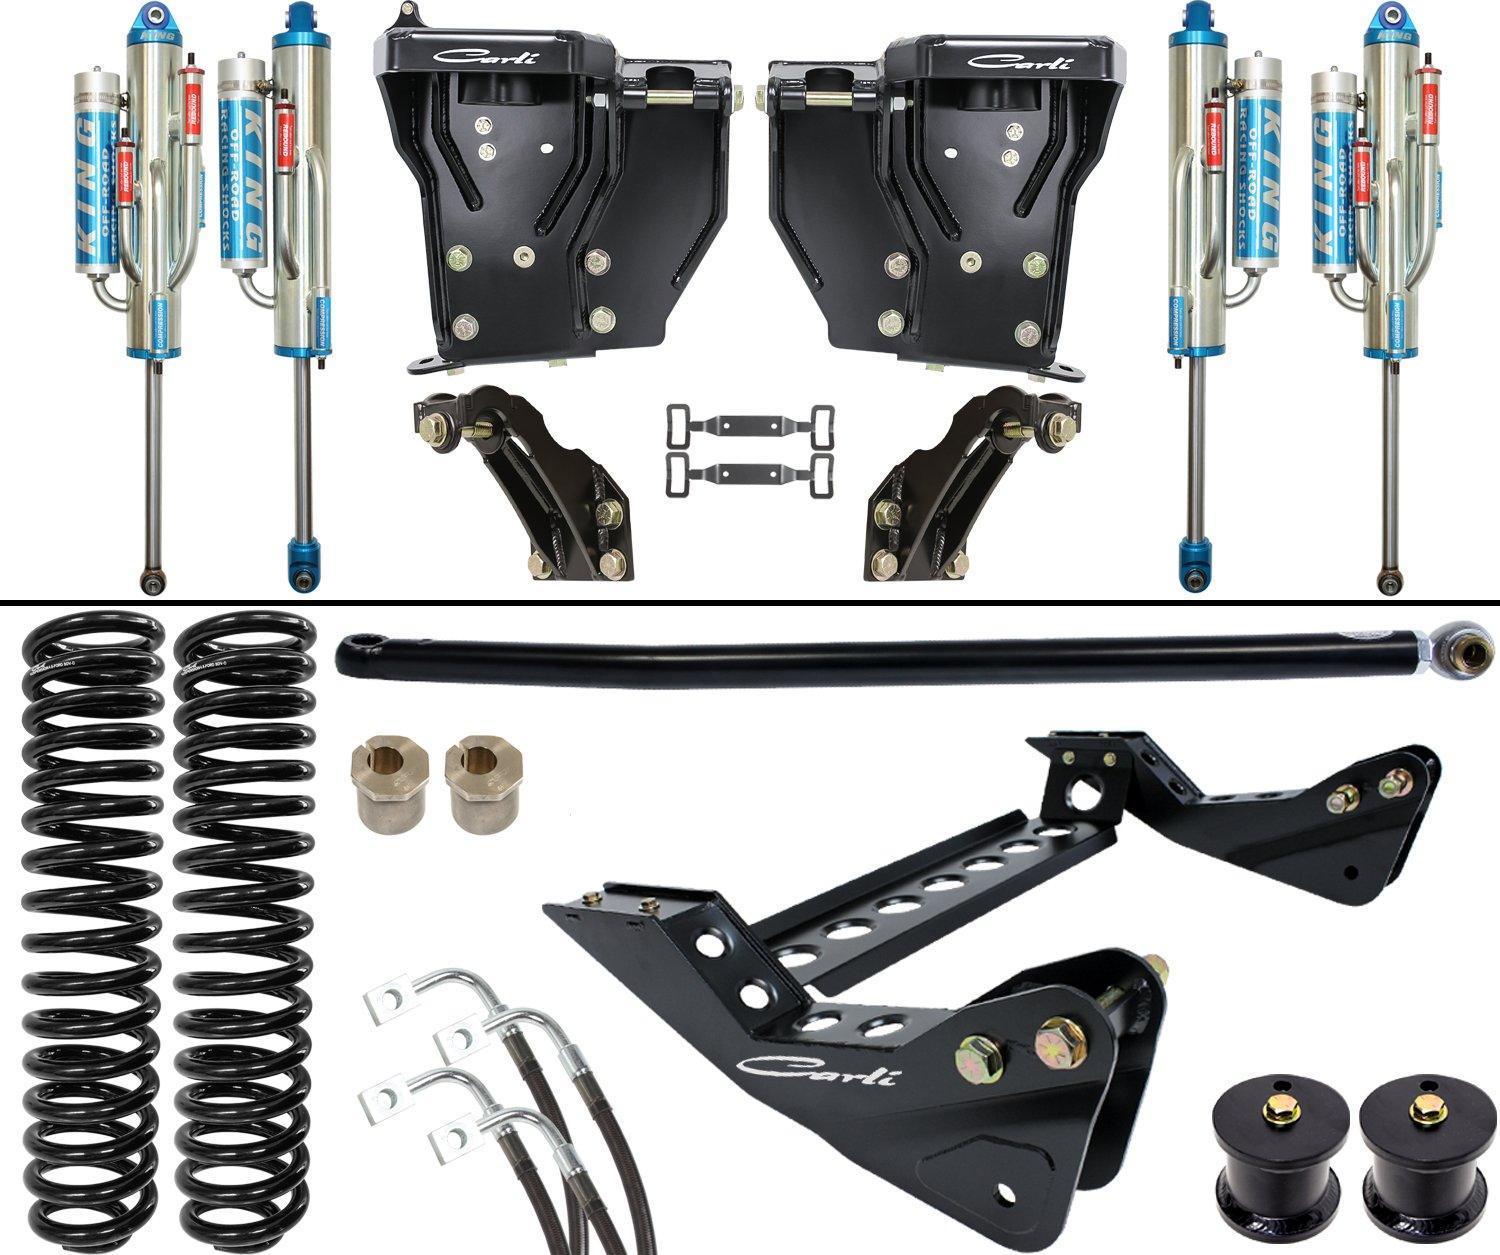 '11-16 Ford F250/350 3.0 Unchained System-4.5" Lift Suspension Carli Suspension parts